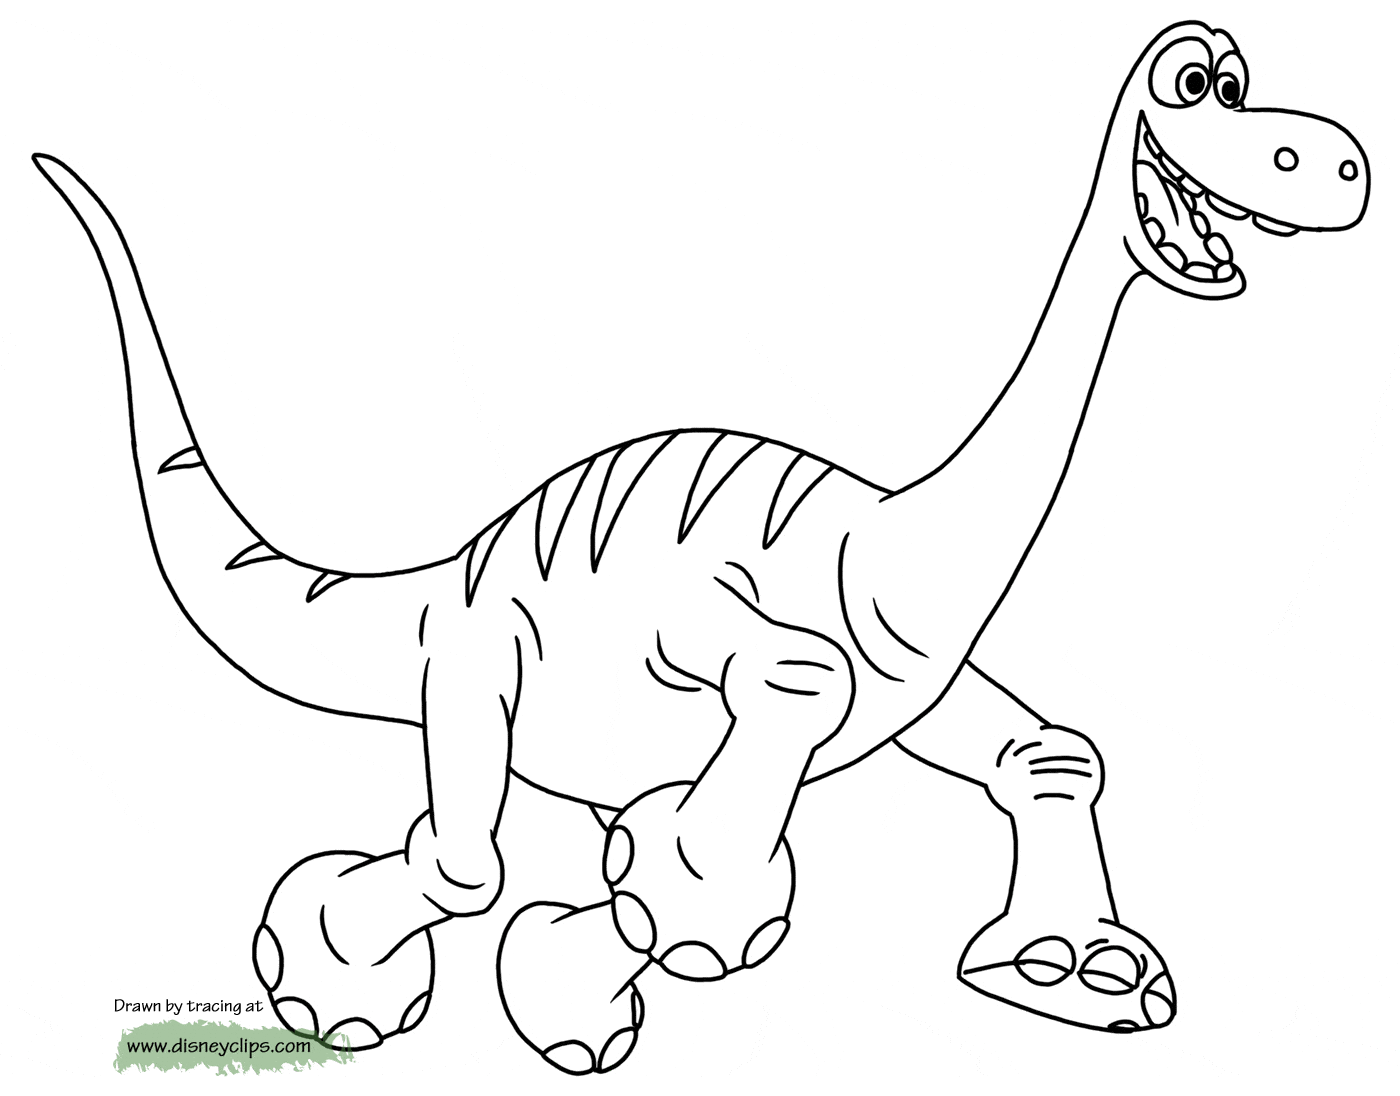 the-good-dinosaur-printable-coloring-page-disney-coloring-book